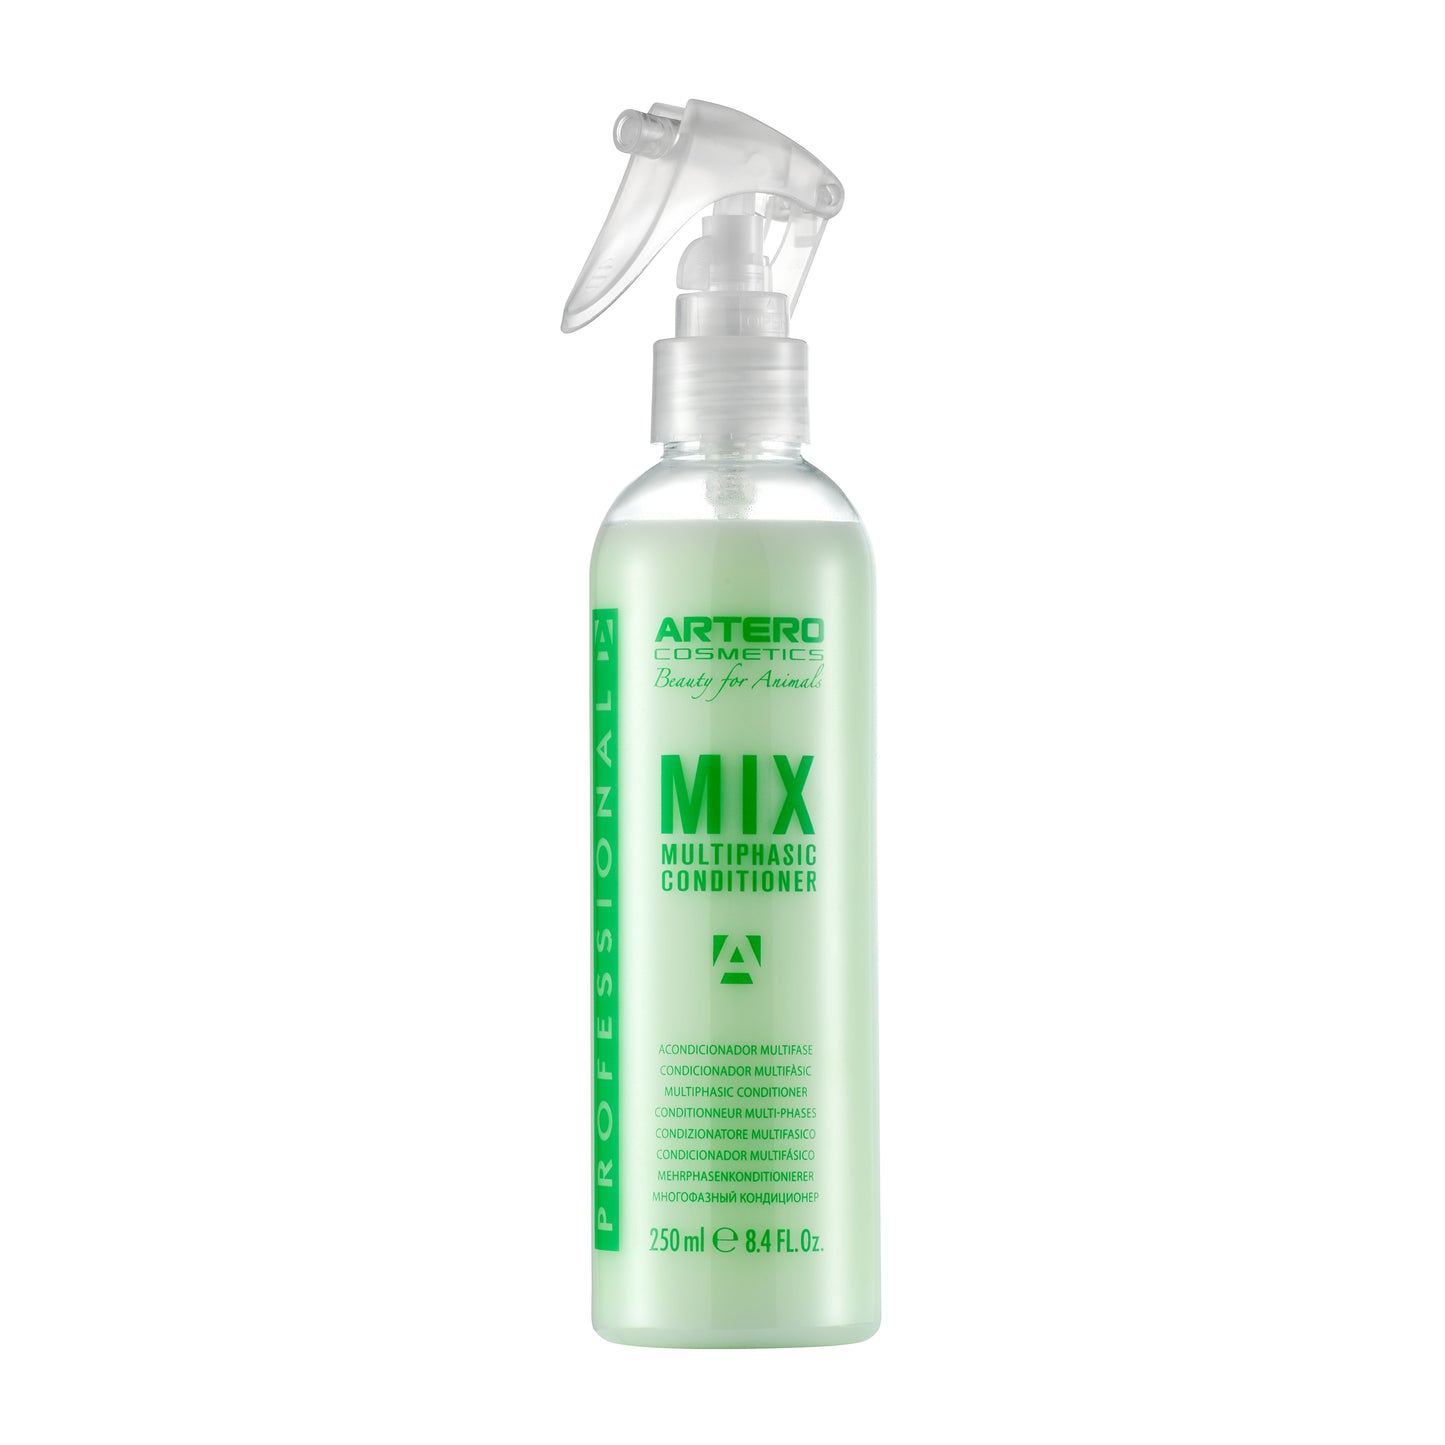 ARTERO Mix Conditioner Spray for Dogs & Cats 250ml